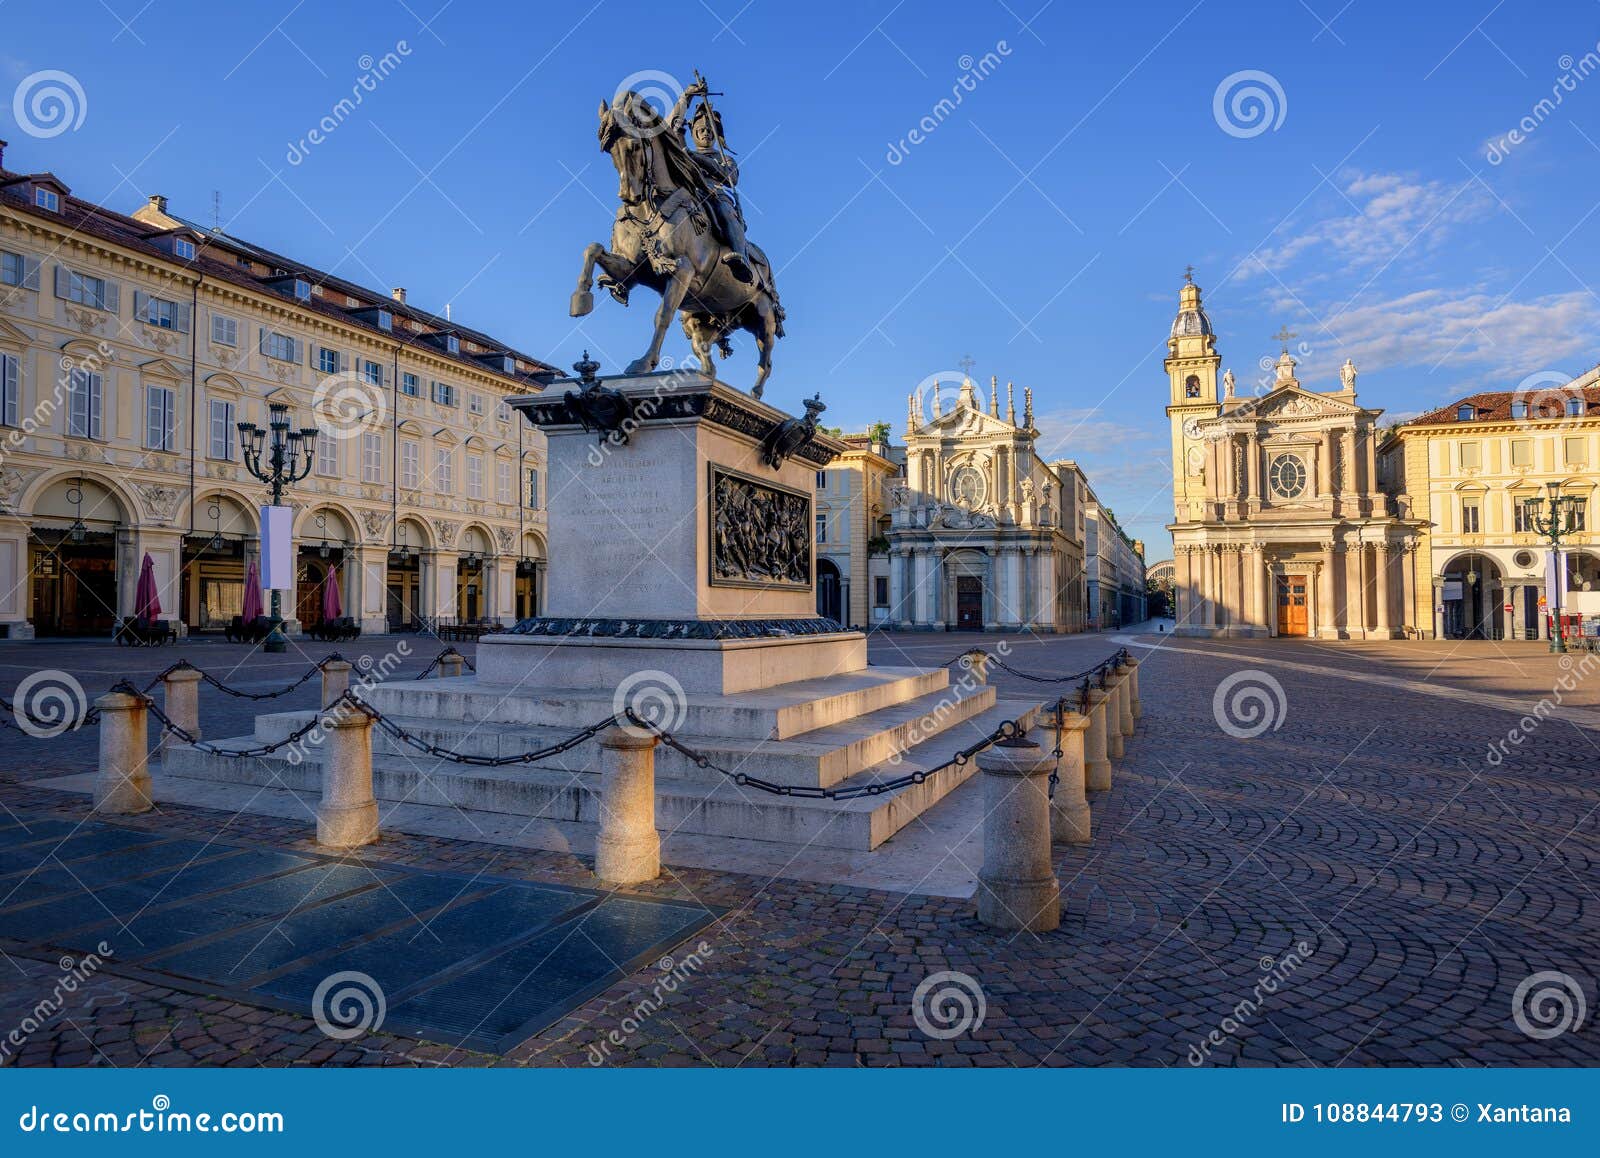 piazza san carlo in the city center of turin, italy